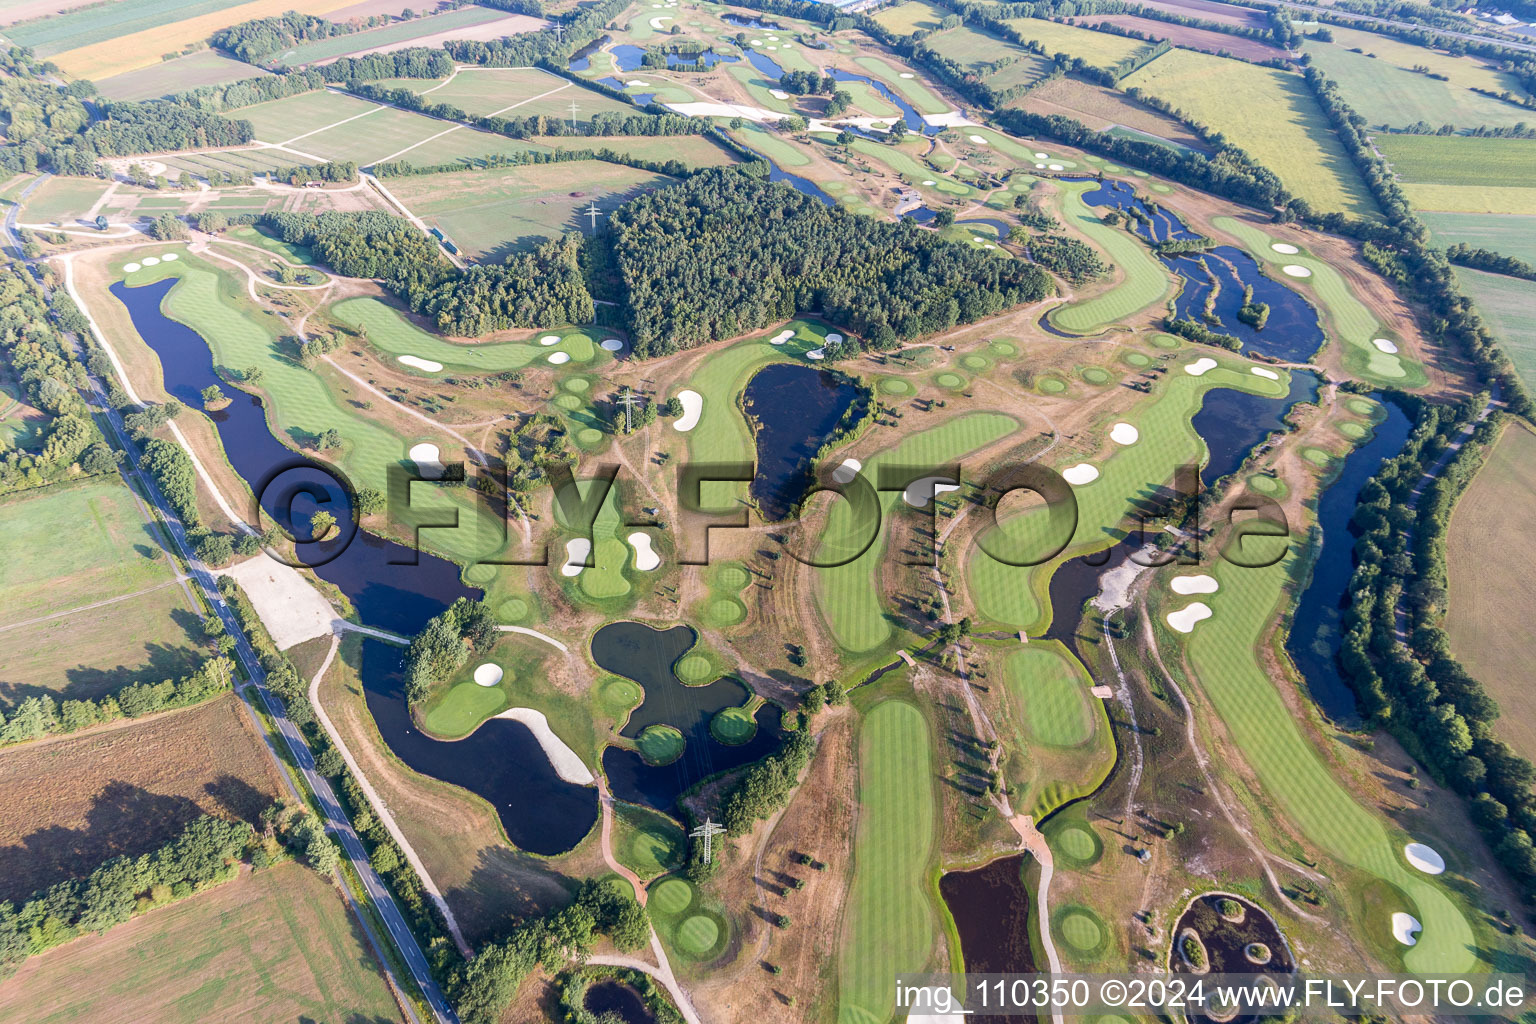 Grounds of the Golf course at Green Eagle Golf Courses in Winsen (Luhe) in the state Lower Saxony, Germany seen from above